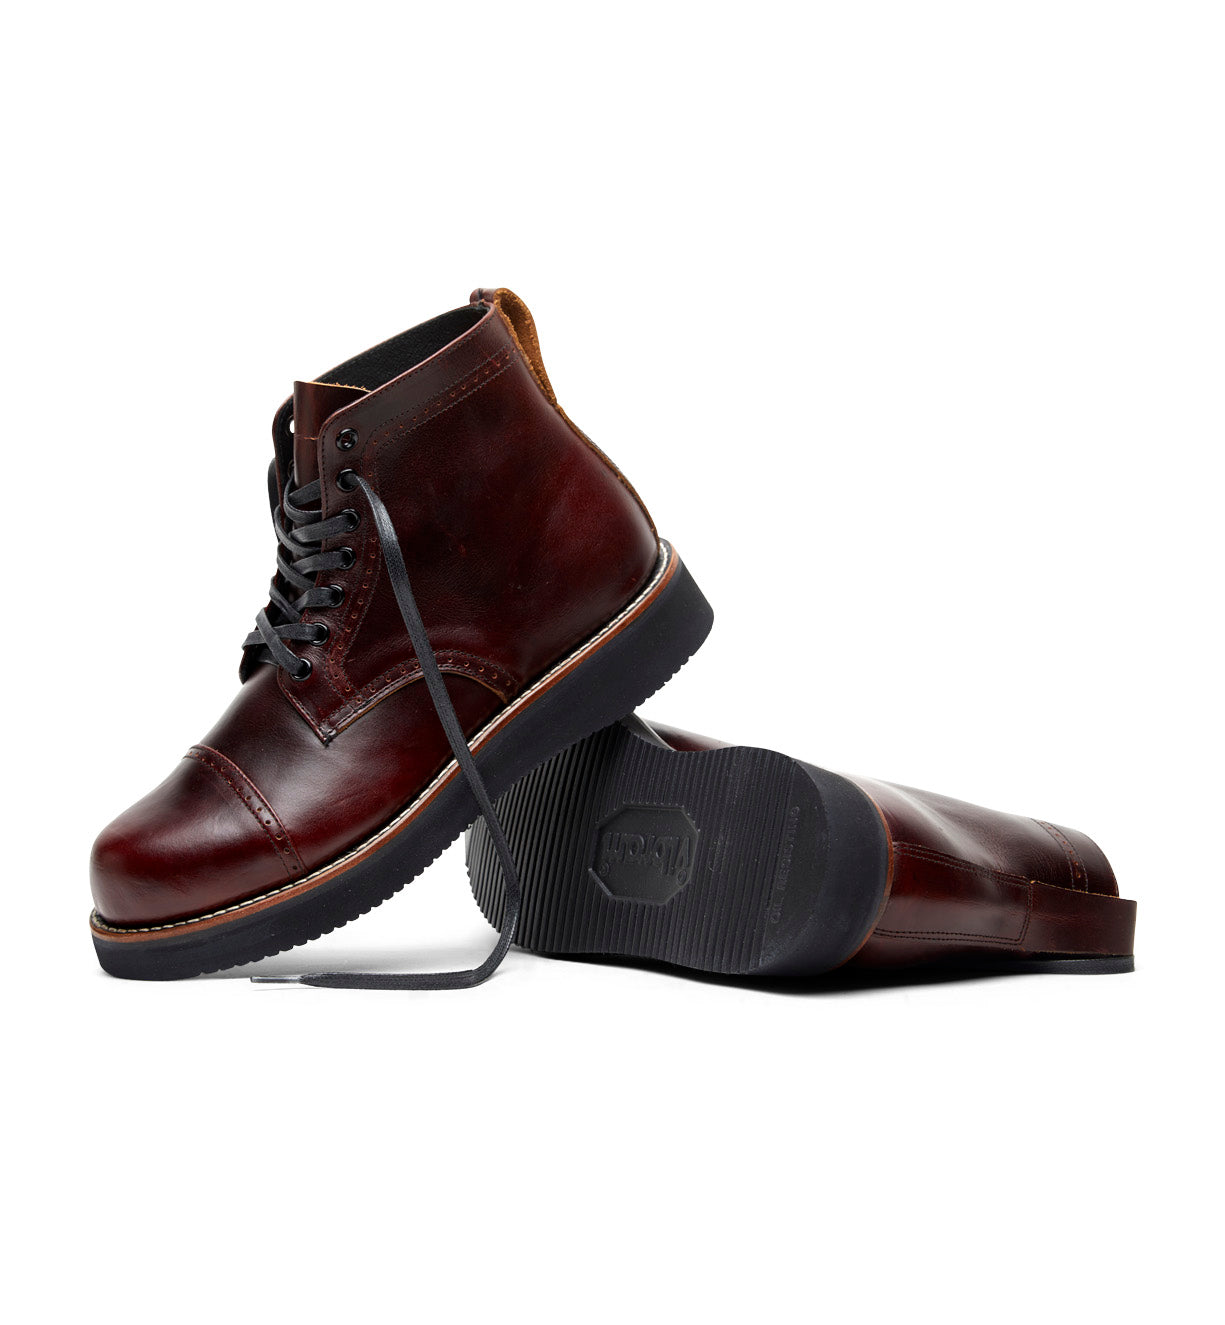 The Broken Homme Aaron Boot from the Broken Homme collection is a stylish men's boot crafted in burgundy leather, featuring a cap toe silhouette.